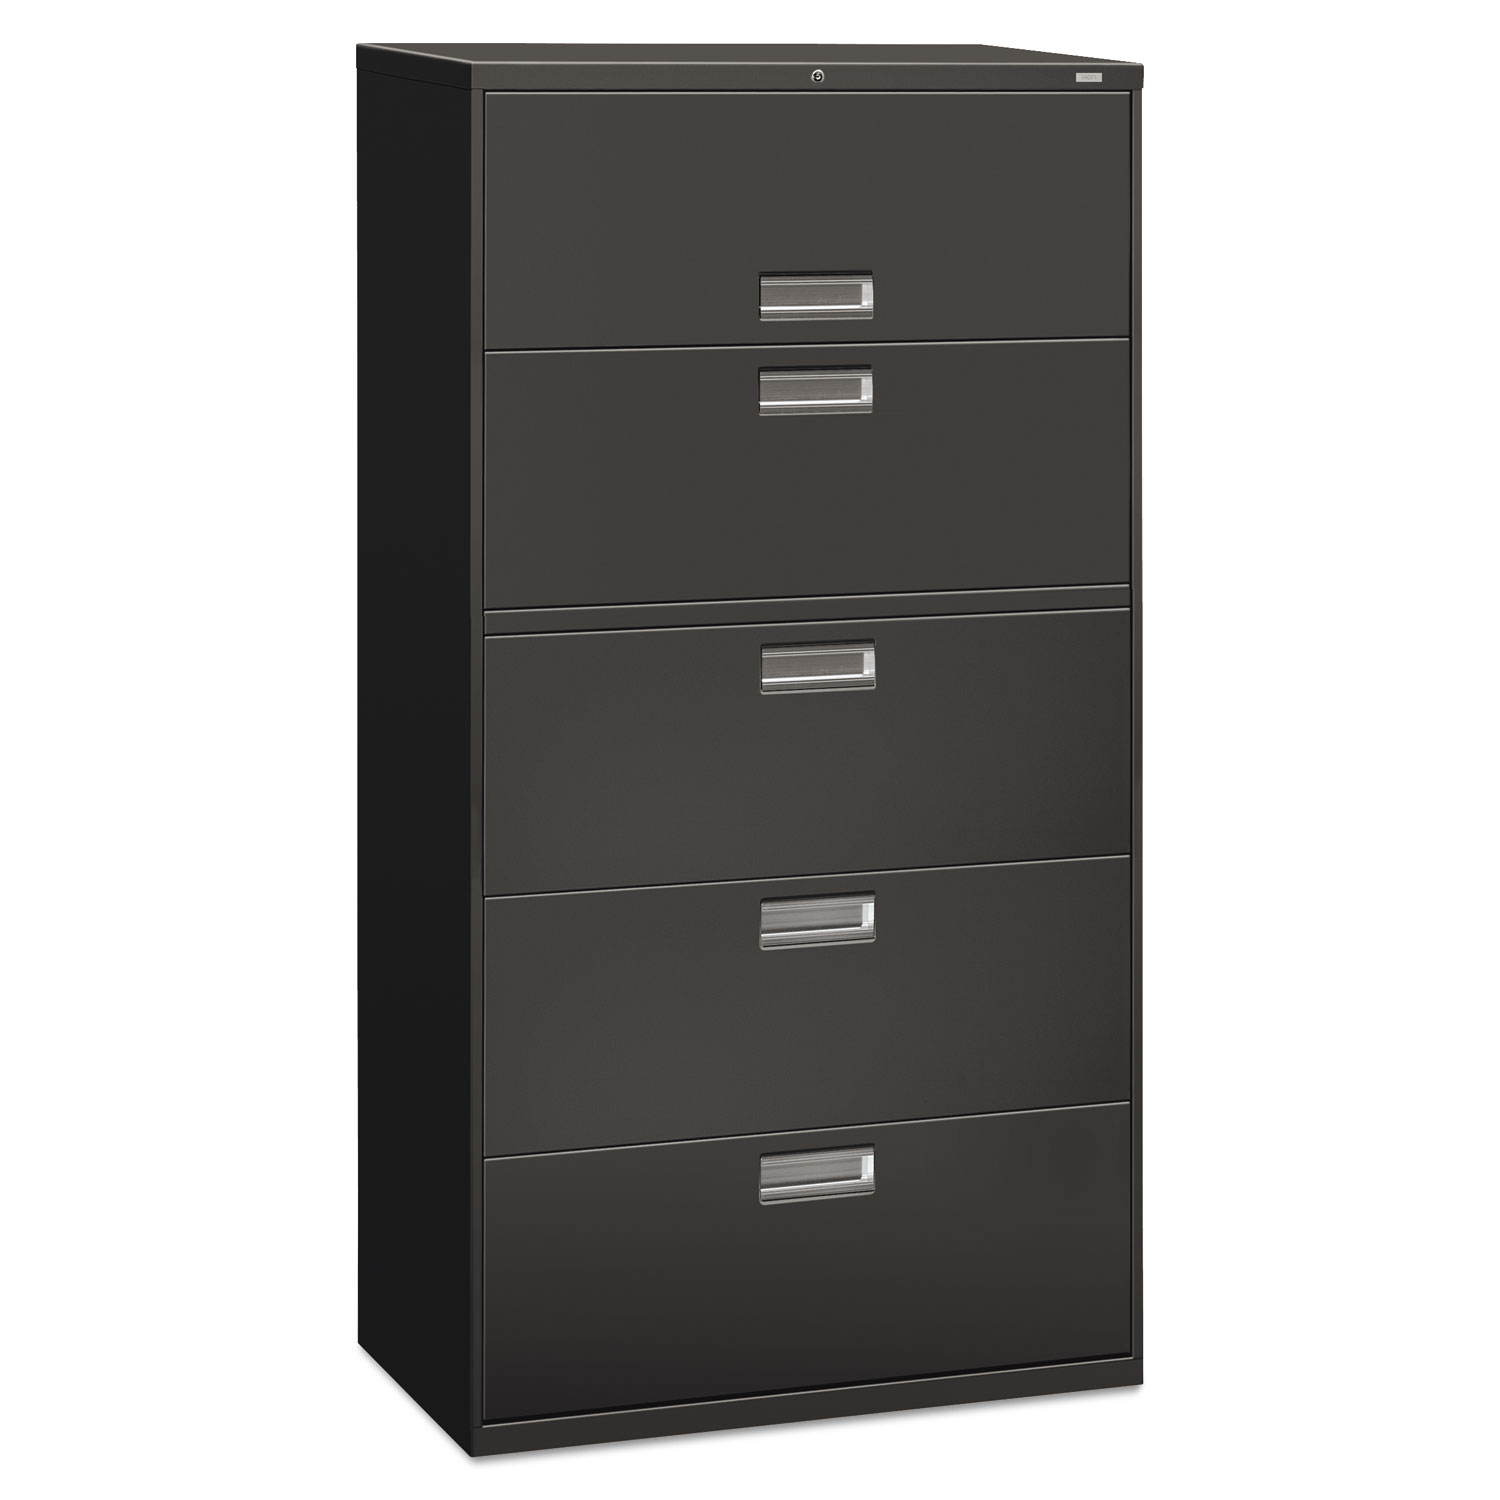  HON H685.L.S 600 Series Five-Drawer Lateral File, 36w x 18d x 64.25h, Charcoal (HON685LS) 